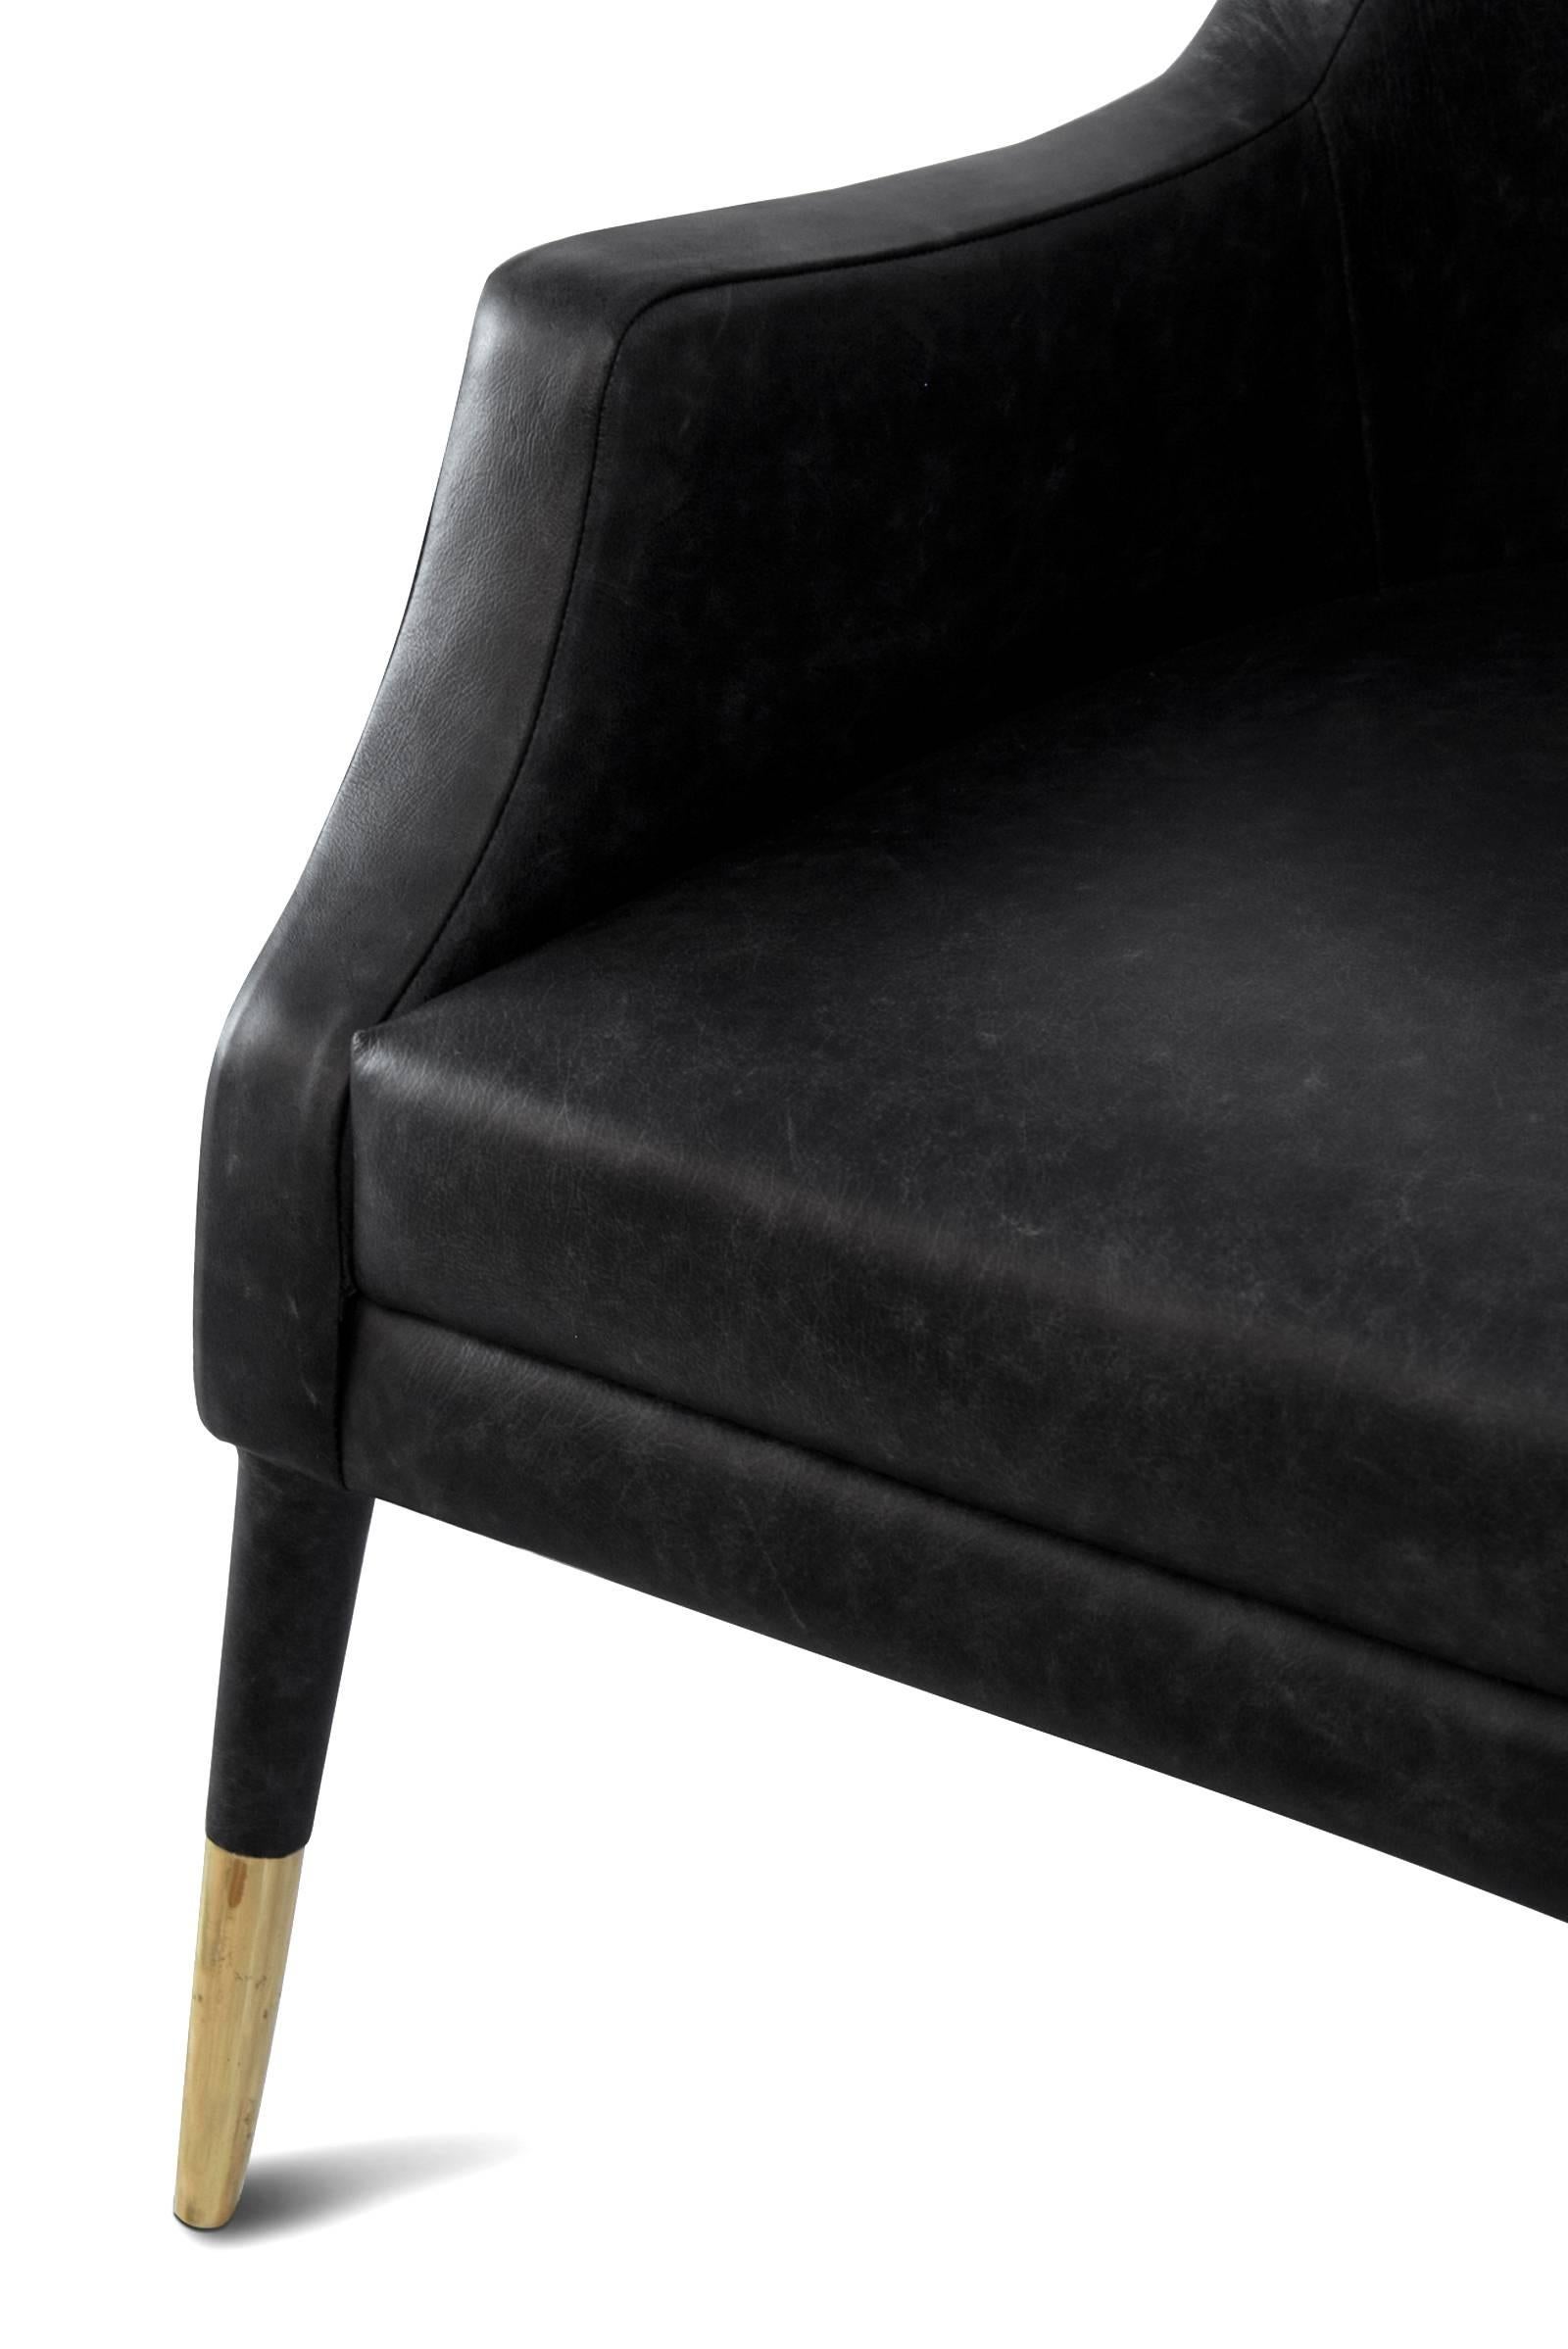 Brass Black Lounge Armchair For Sale